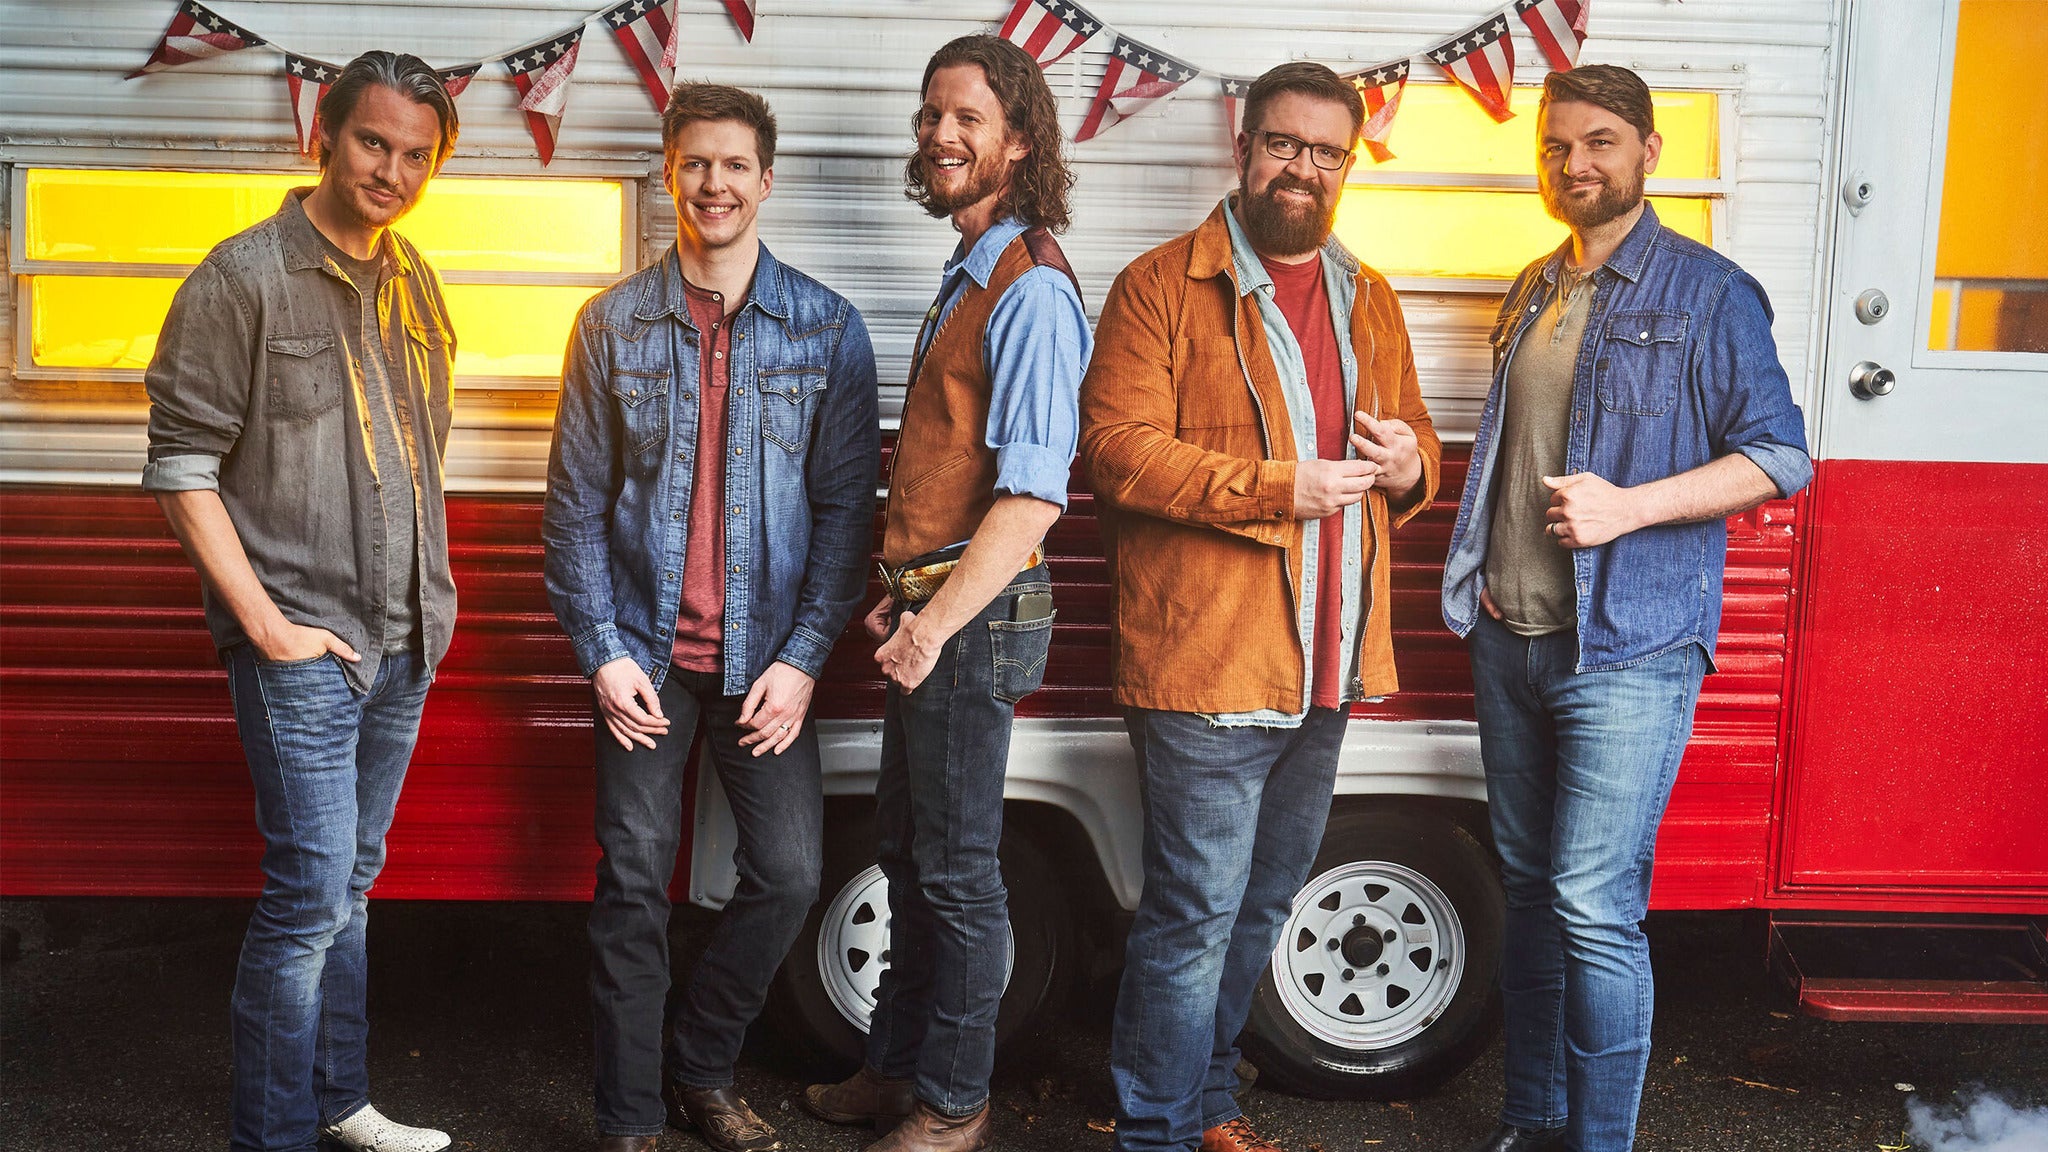 presale code for An Evening with Home Free tickets in Charleston - WV (Charleston Coliseum & Convention Center)